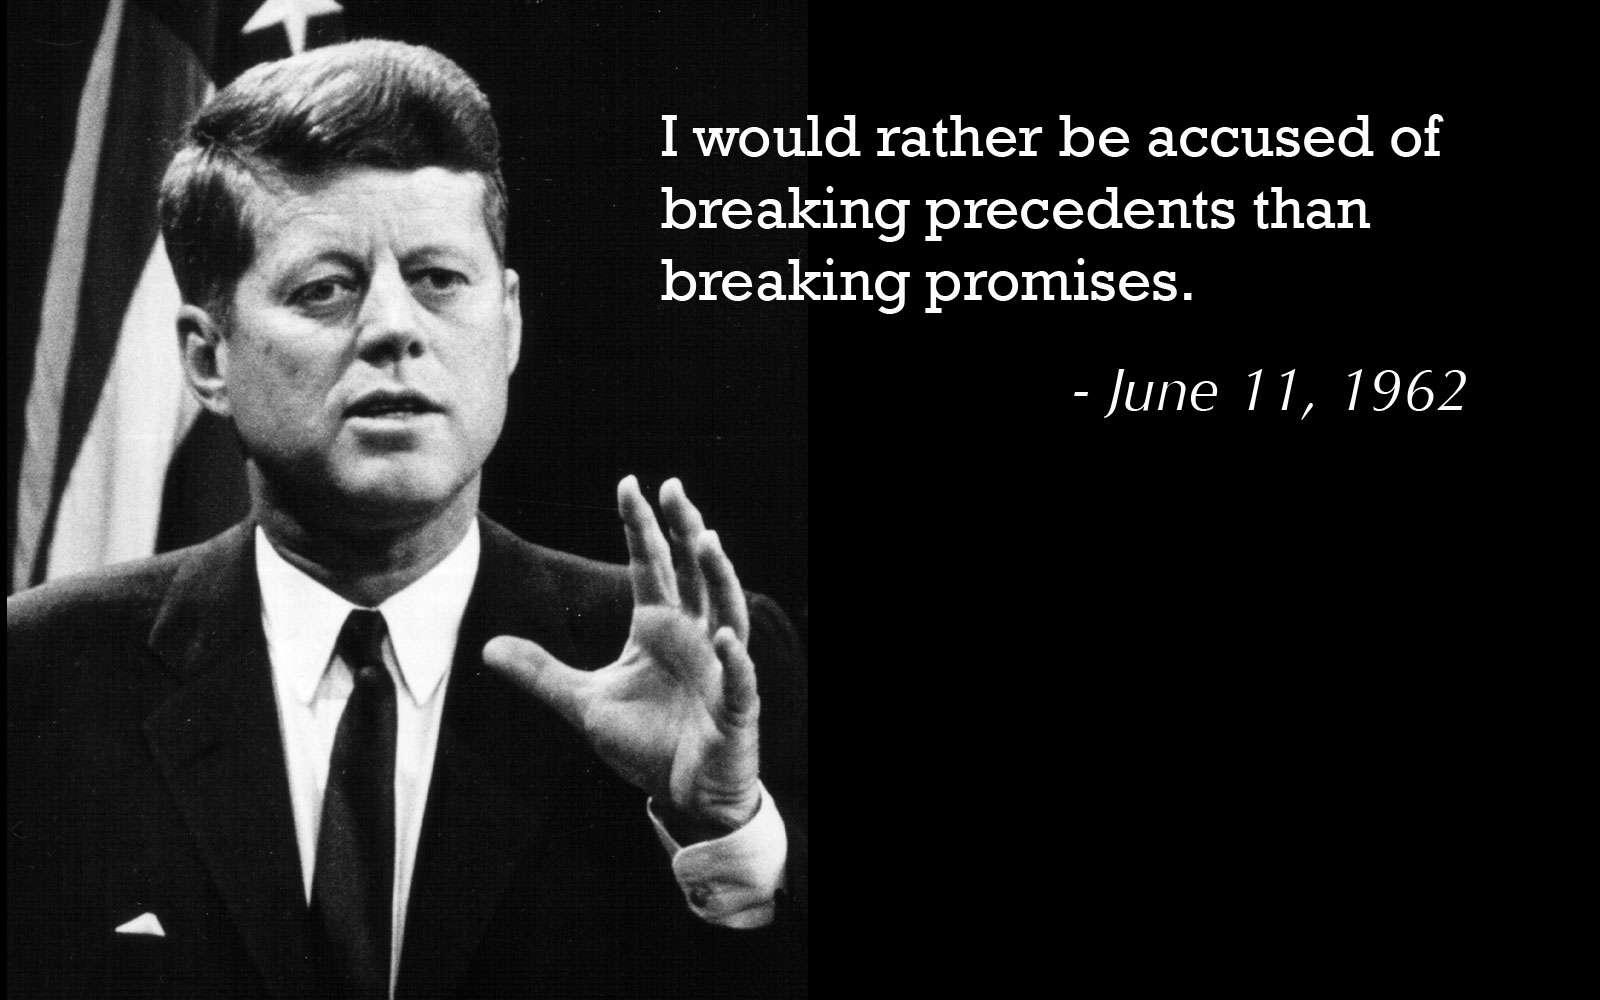 Best Jfk Famous Quotes of all time Learn more here | quotesenglish1